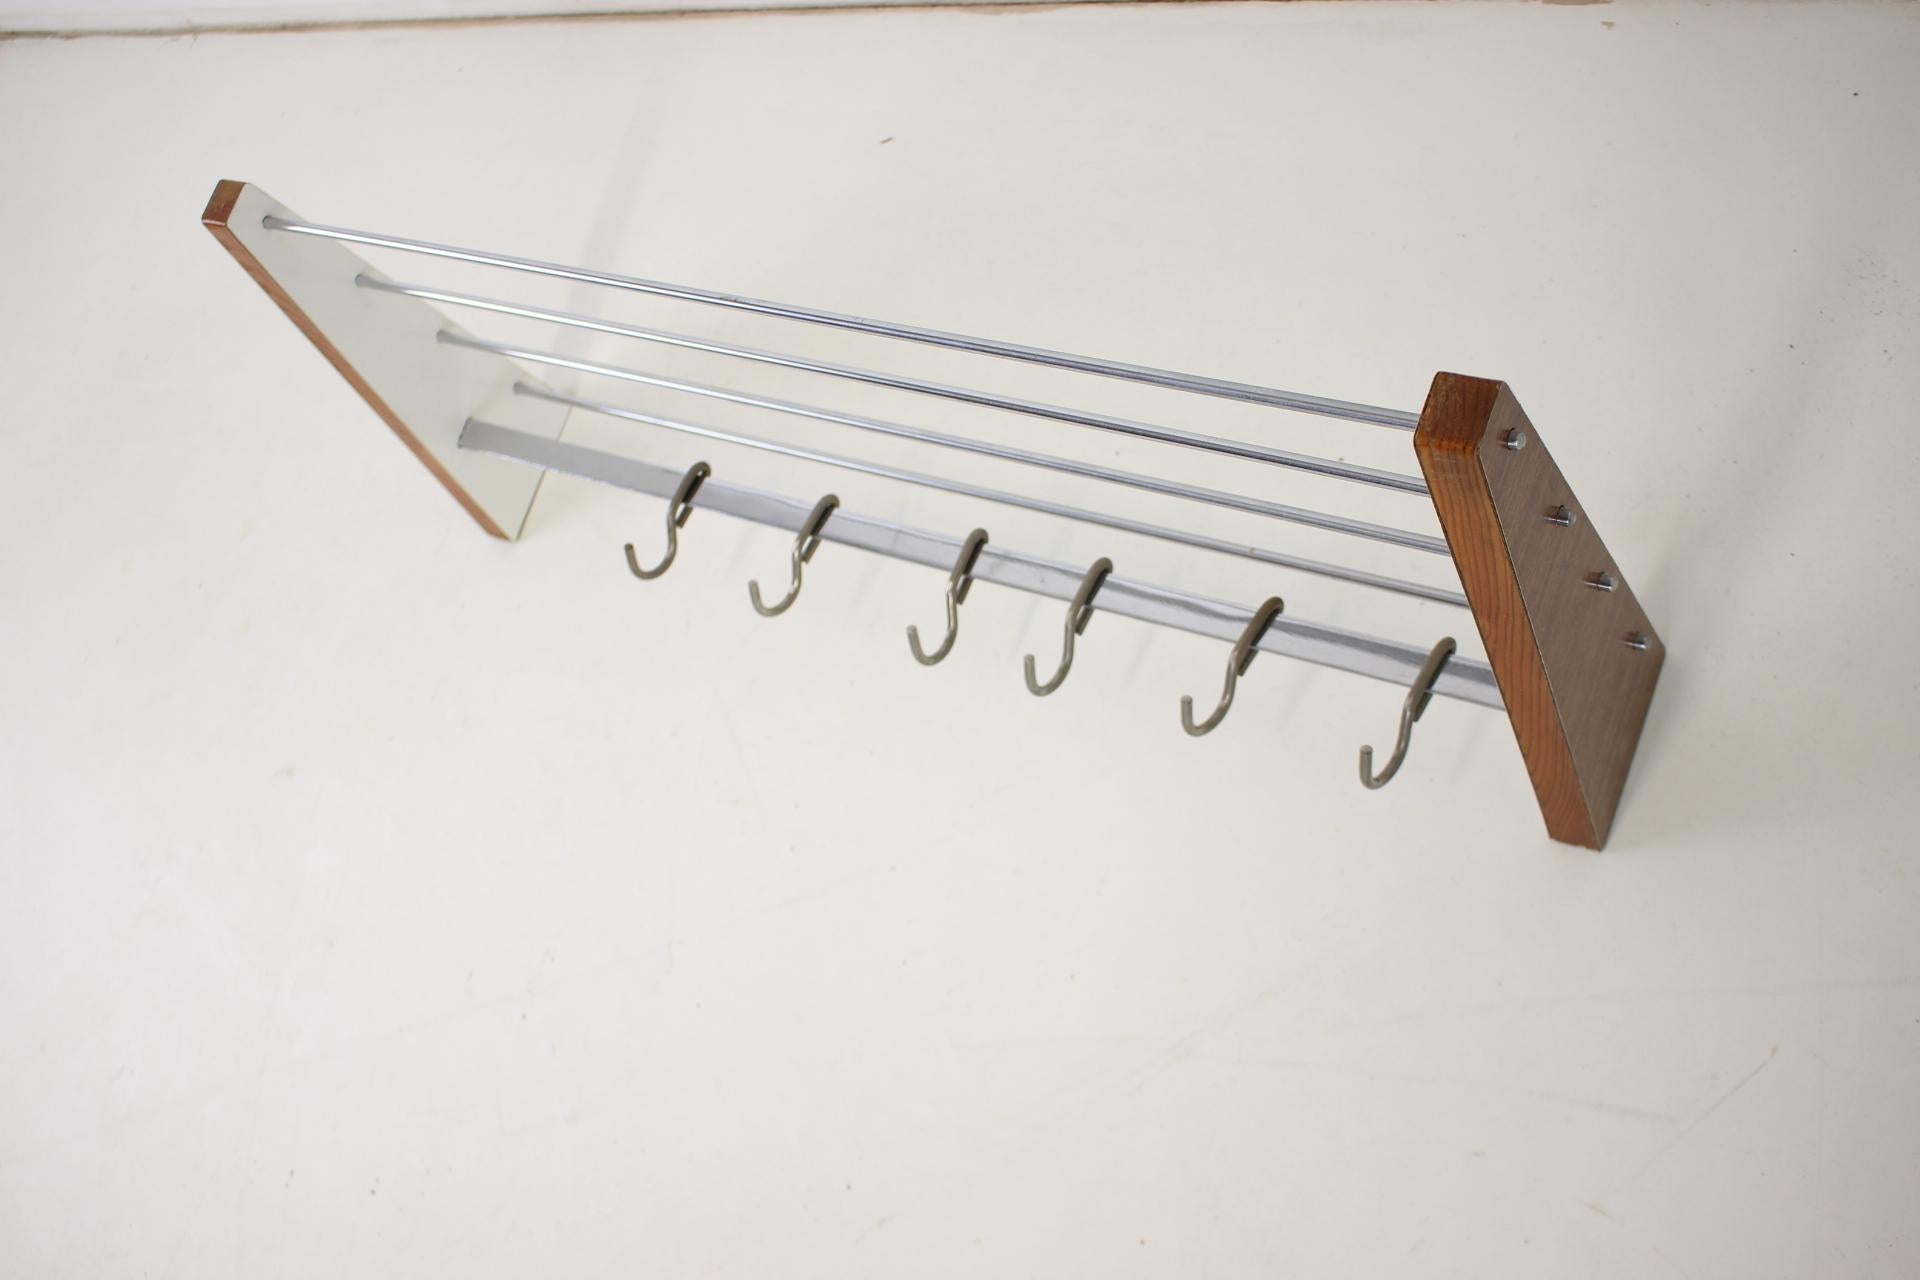 -Made in Czechoslovakia
-Manufacture of metal, wood and wood imitation
-Wall coat hanger with 6 hooks.